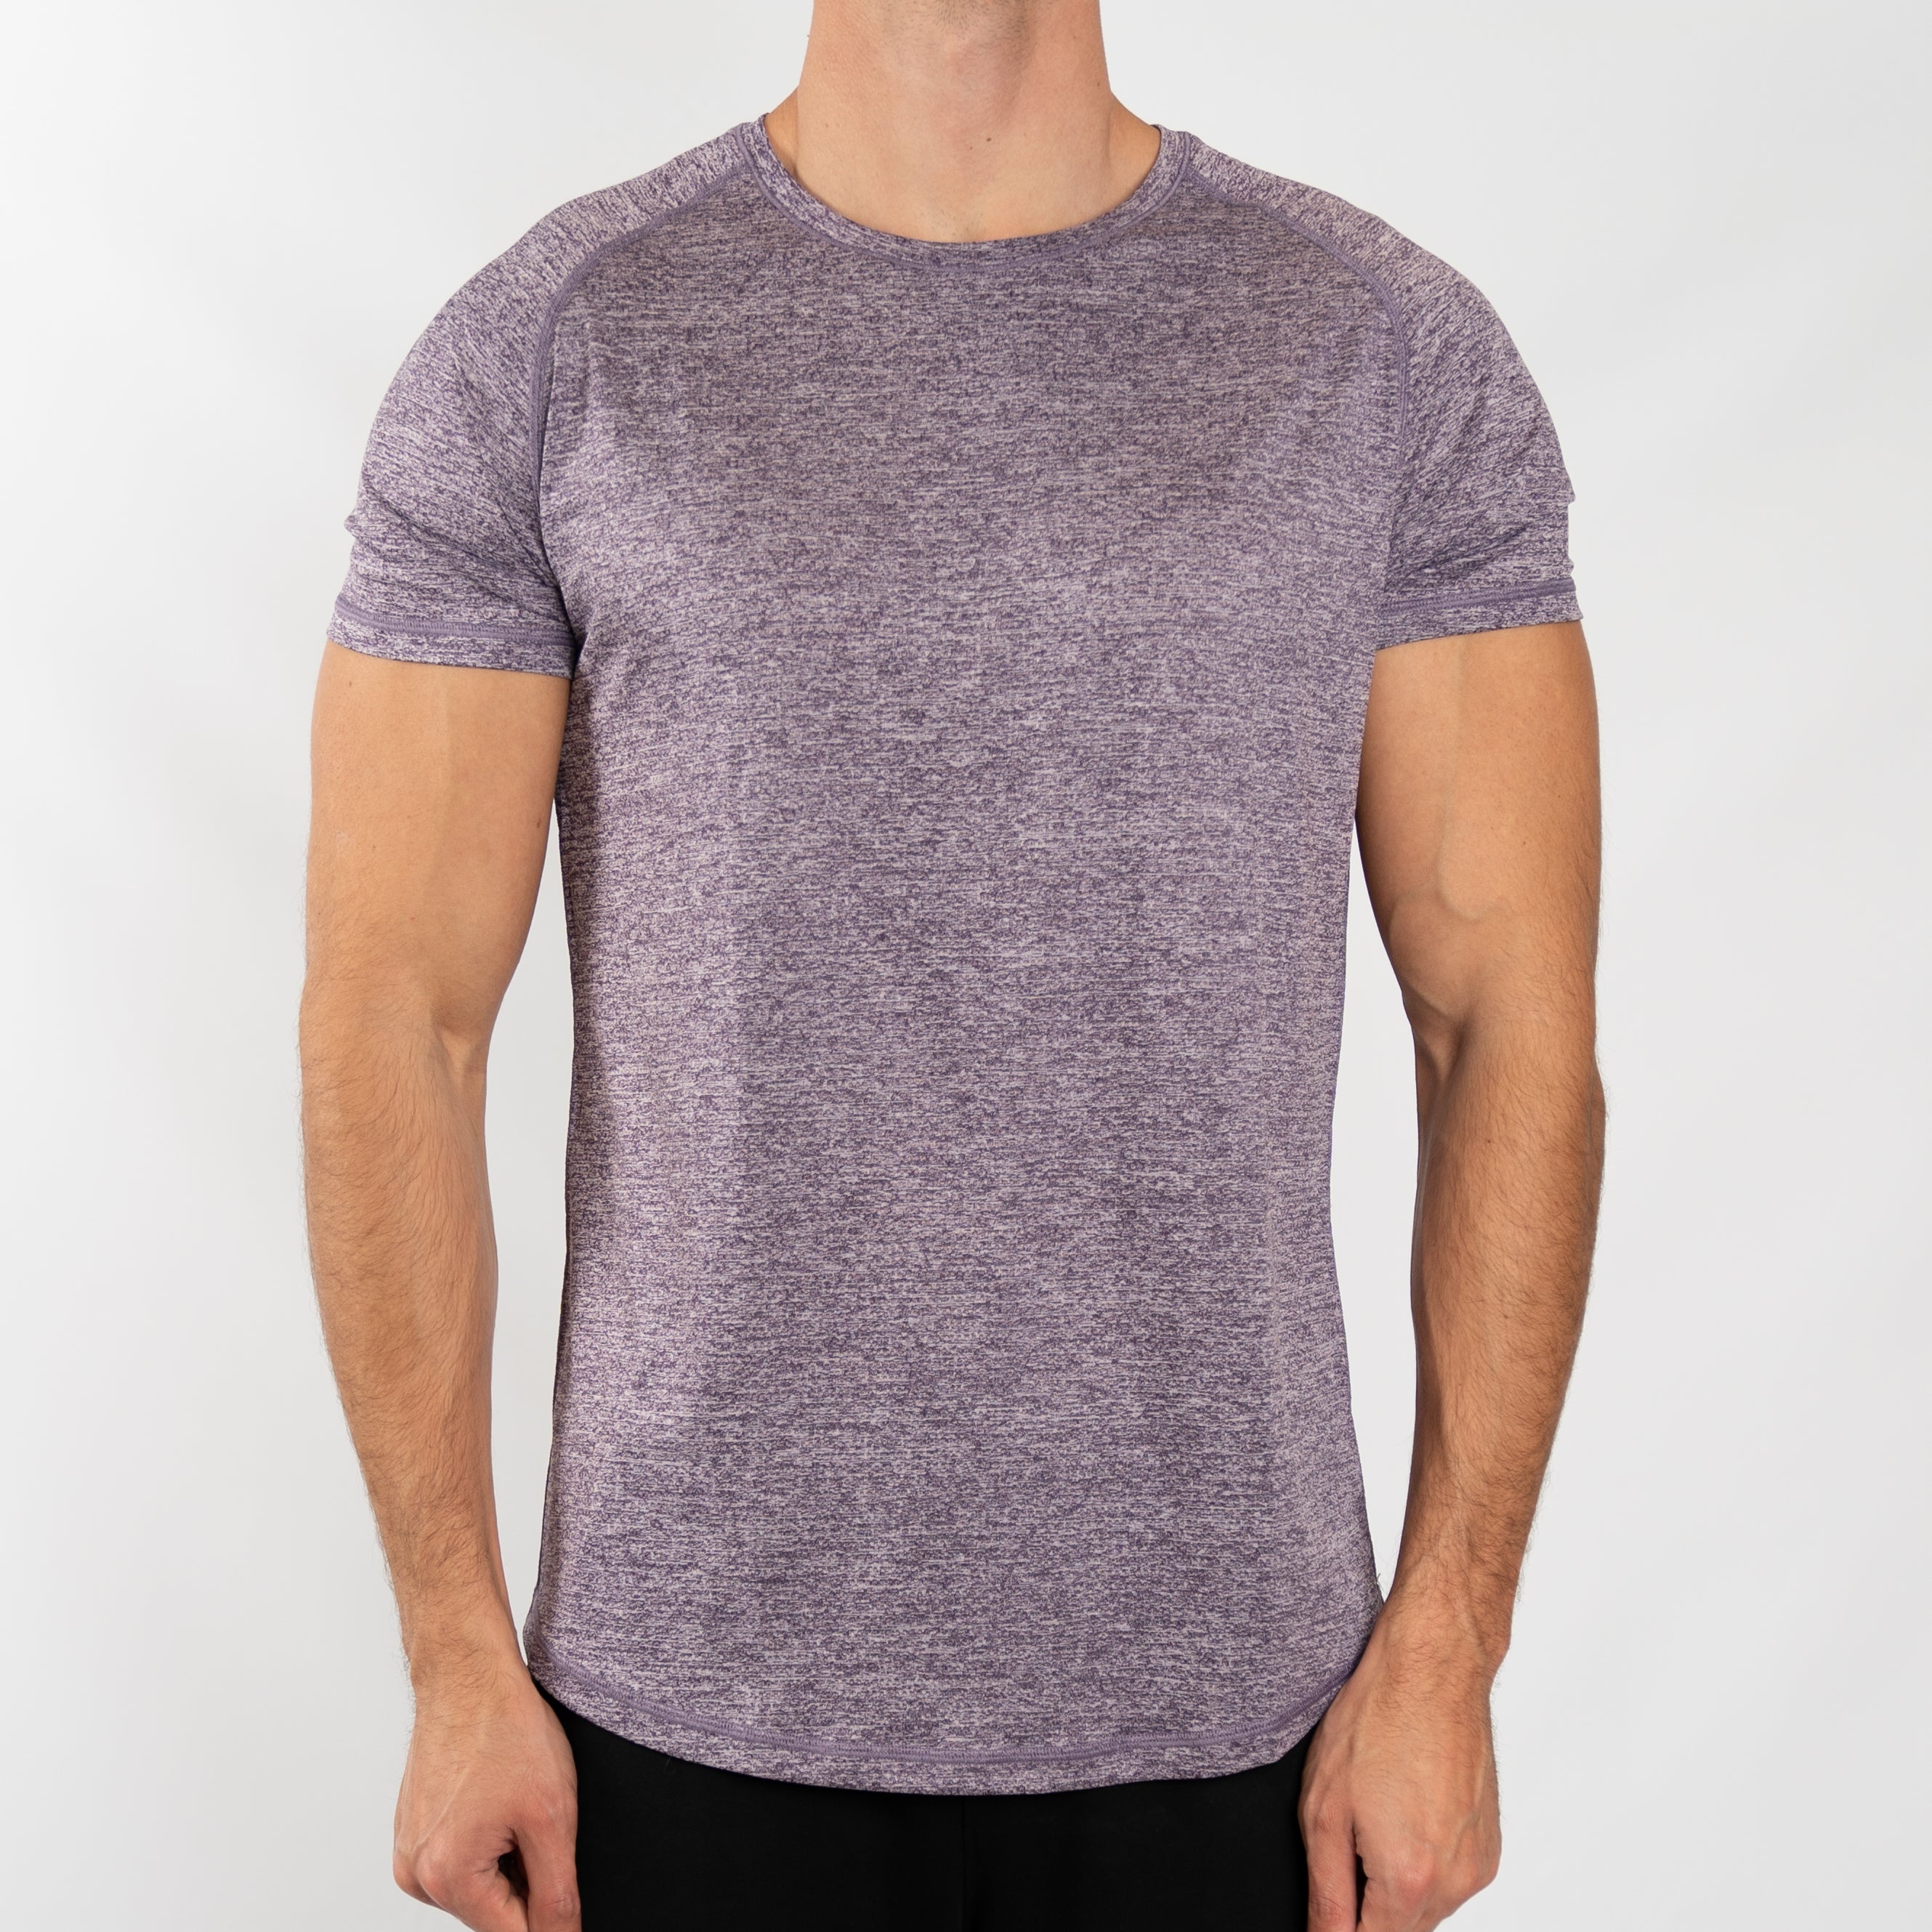 Men's Performance Tee in Purple - Southern Athletica